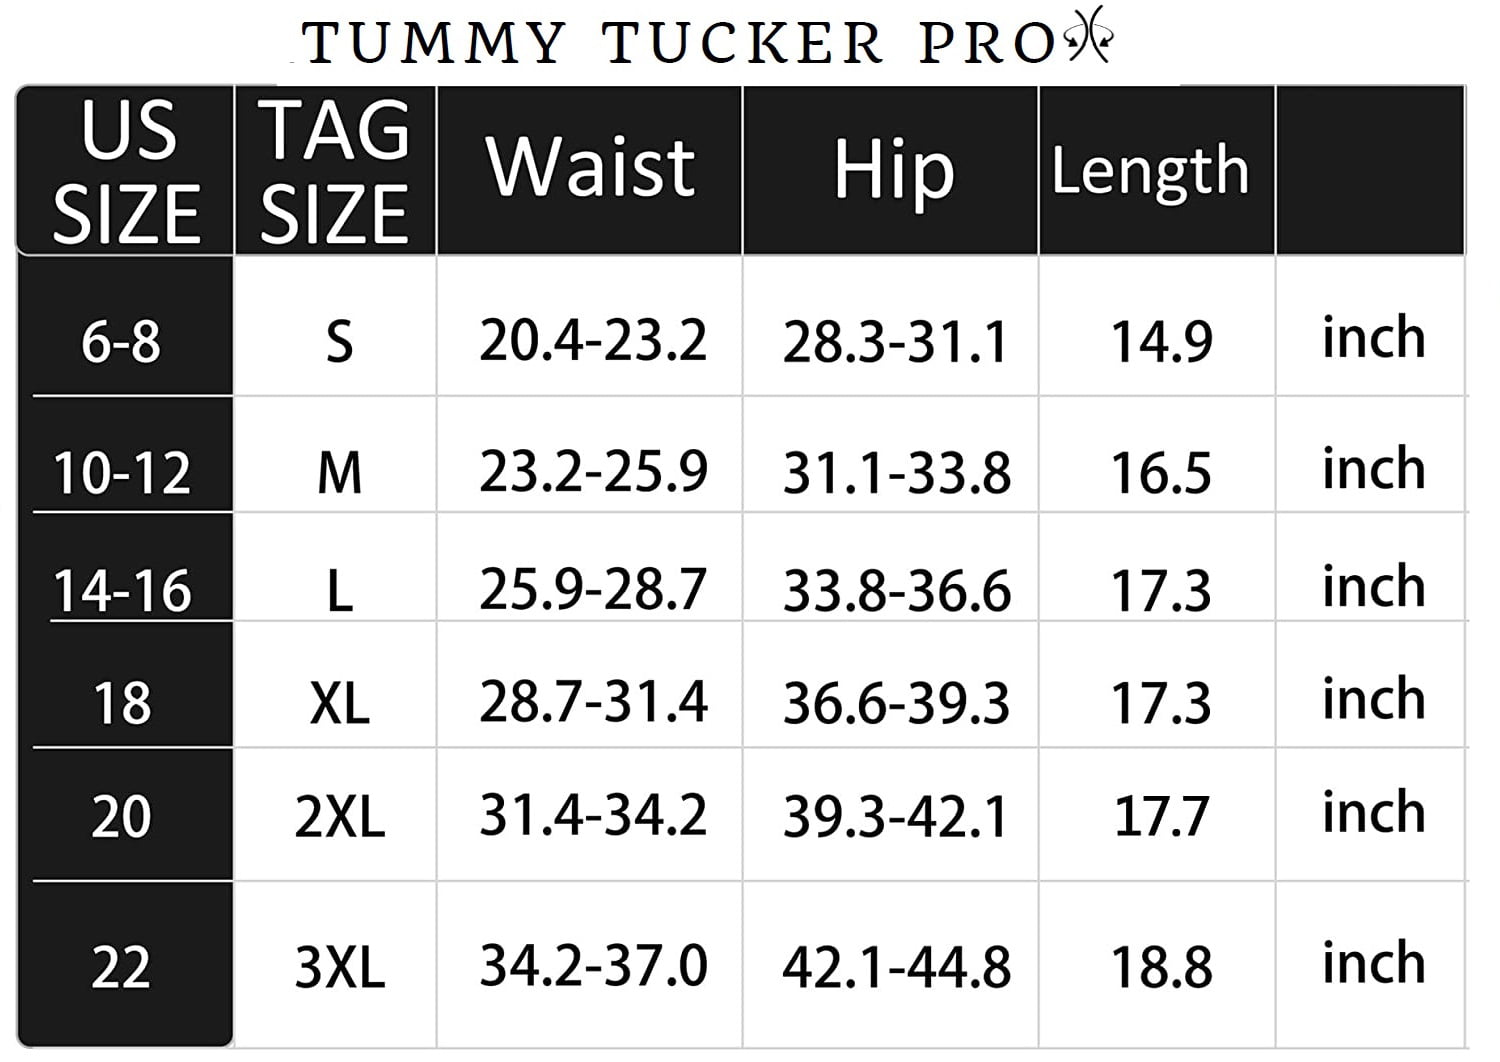 Tummy Tucker Price Starting From Rs 125/Pc. Find Verified Sellers